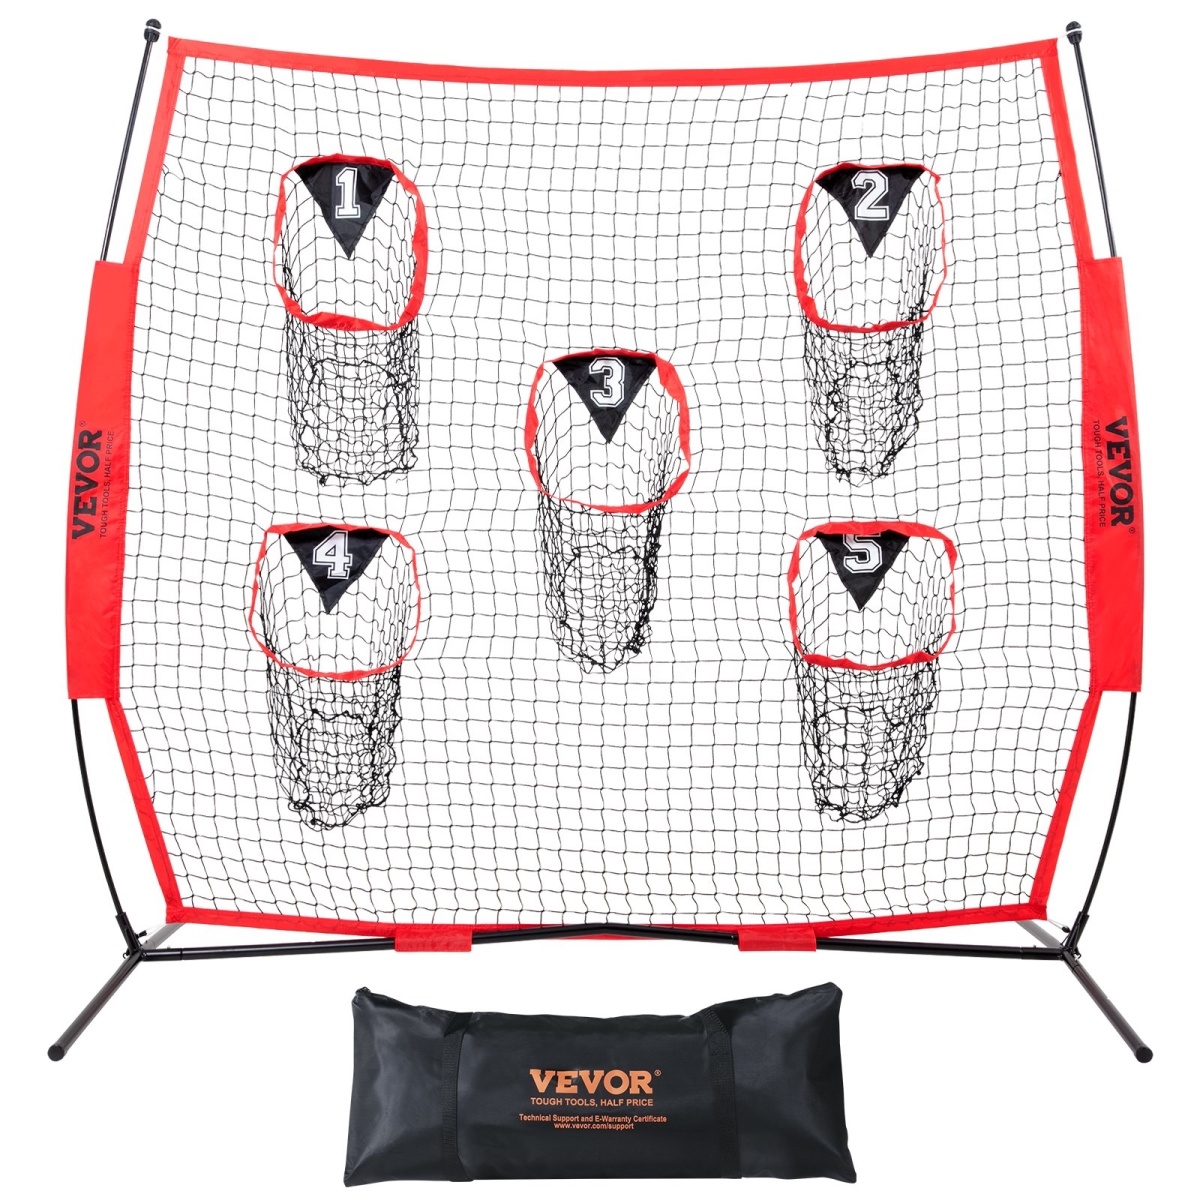 UPC 197988073604 product image for GLQW88YC0000RHWMZV0 8 x 8 ft. Football Trainer Throwing Net, Red | upcitemdb.com